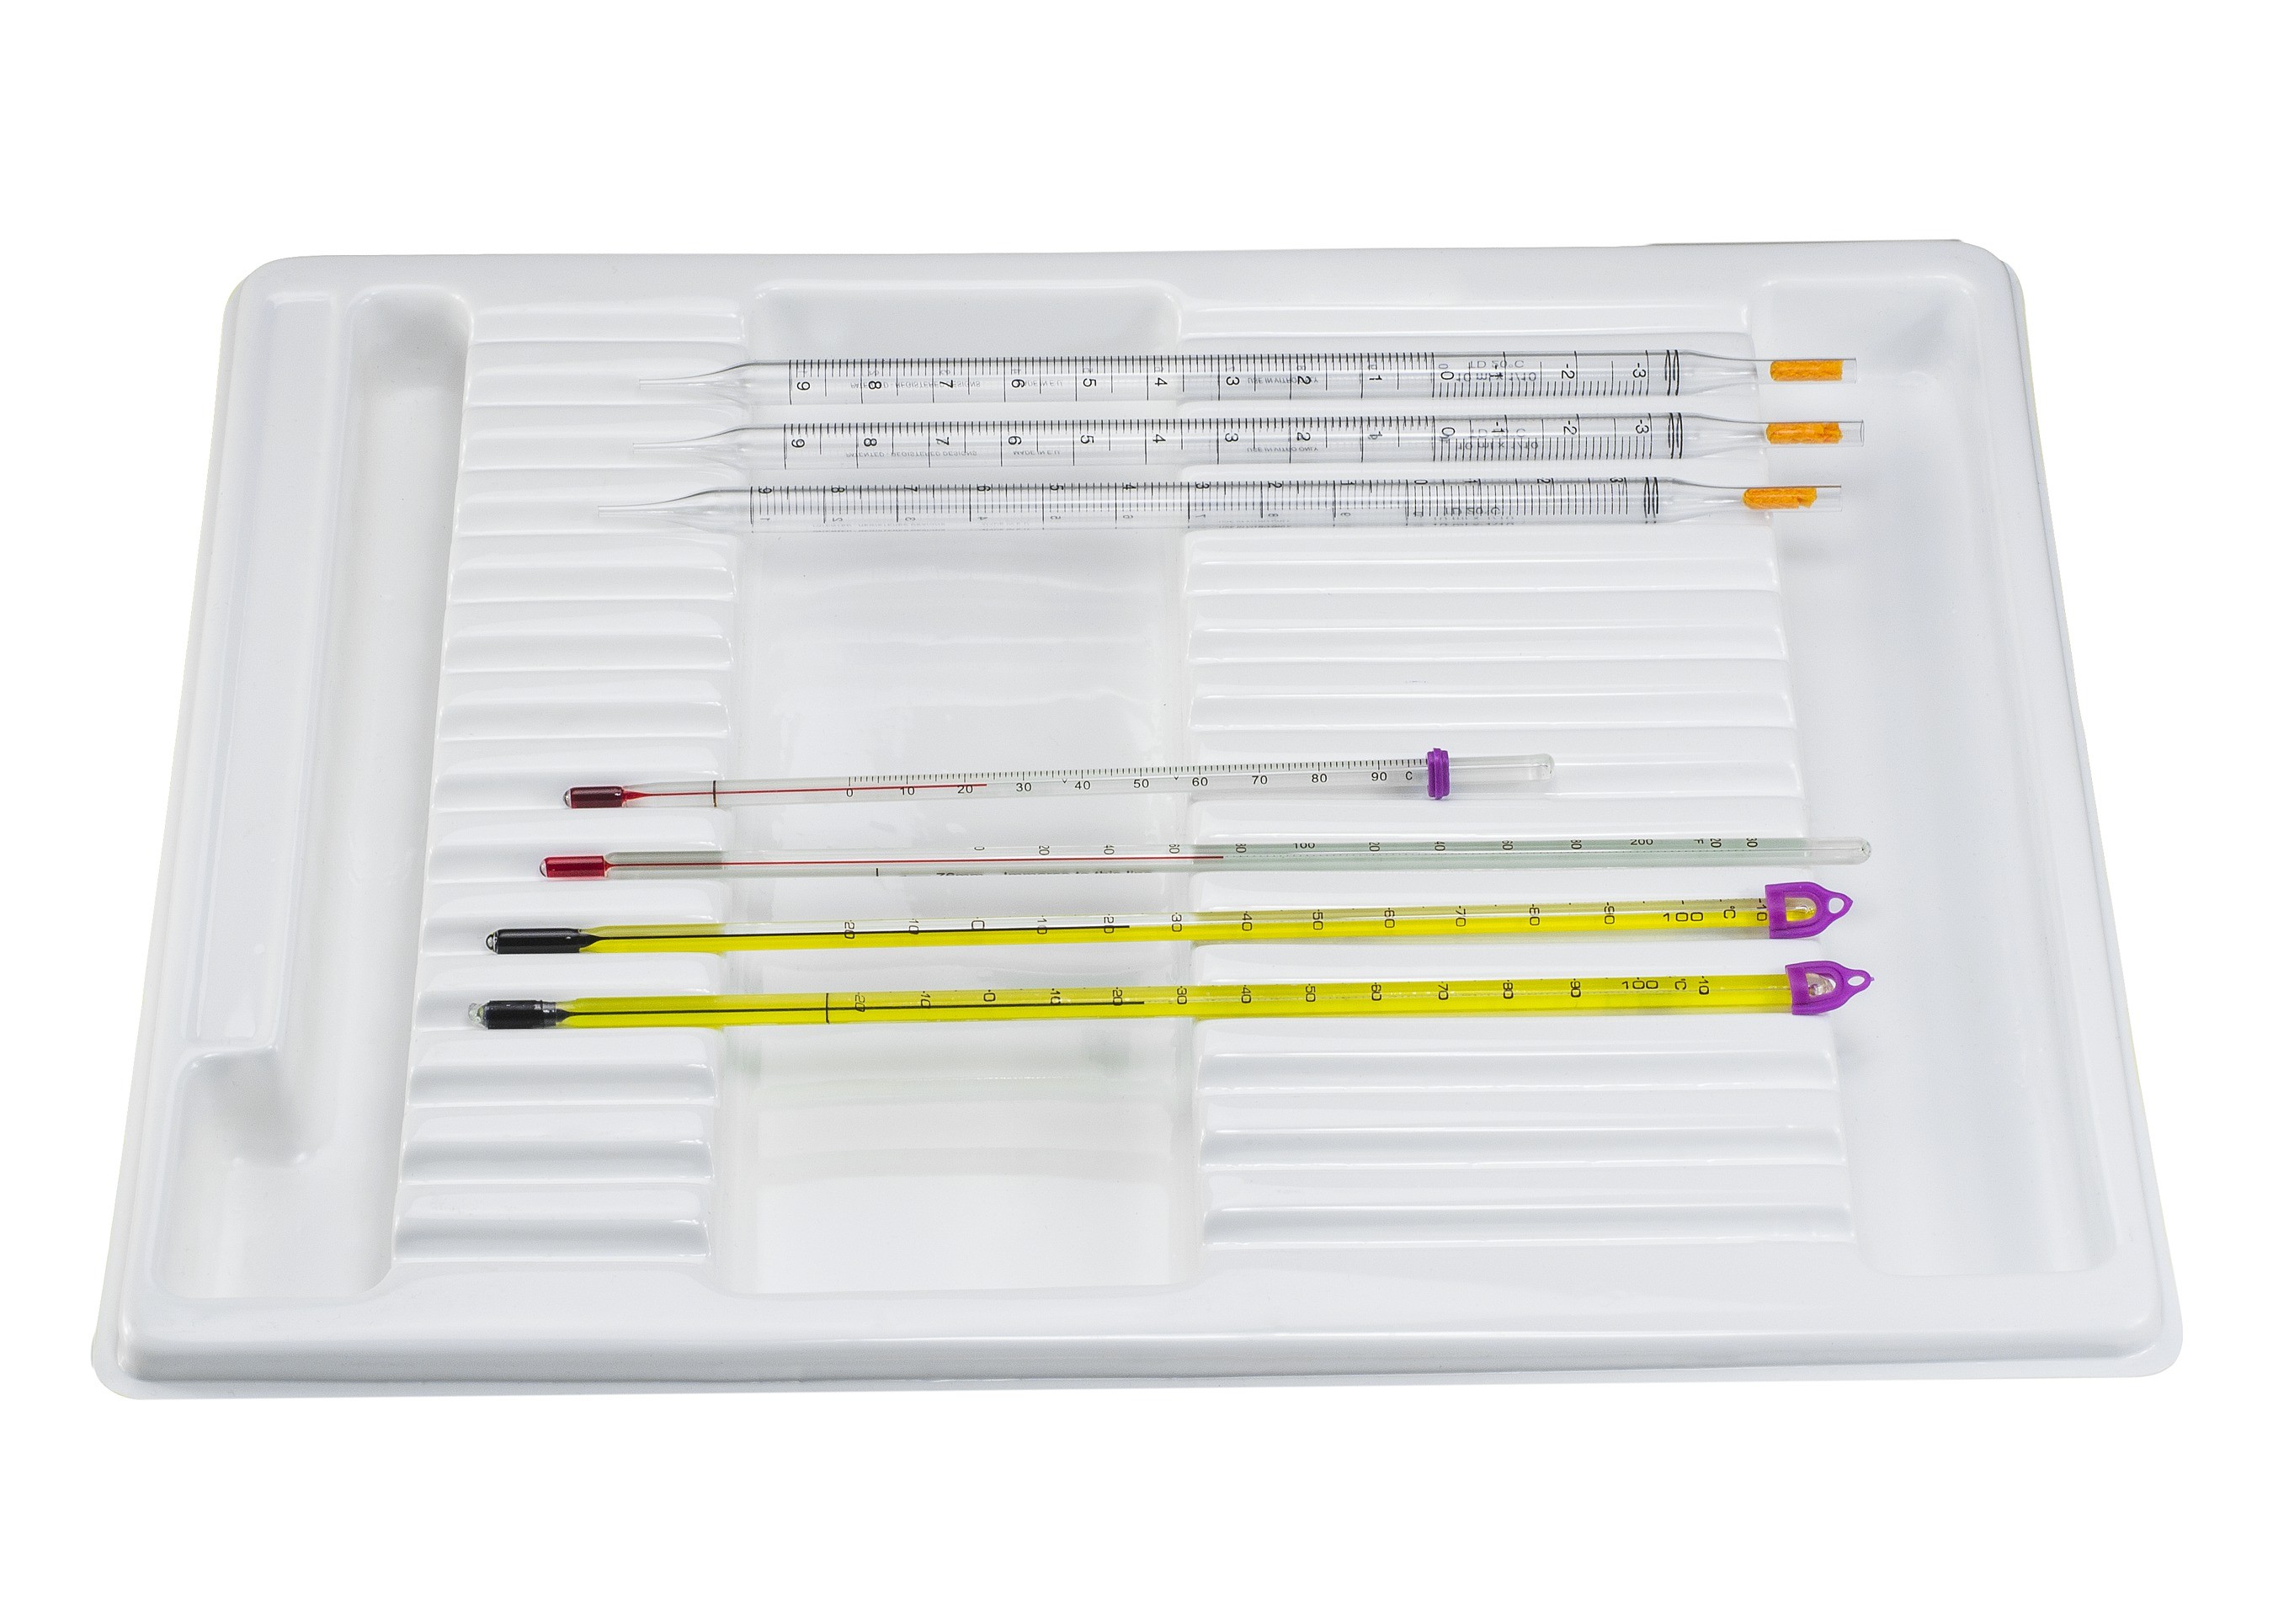 SP Bel-Art Lab Drawer Compartment Tray for Thermometers; 14 Rests, 3 Compartments, 14 x 17½ x 2¼ in.